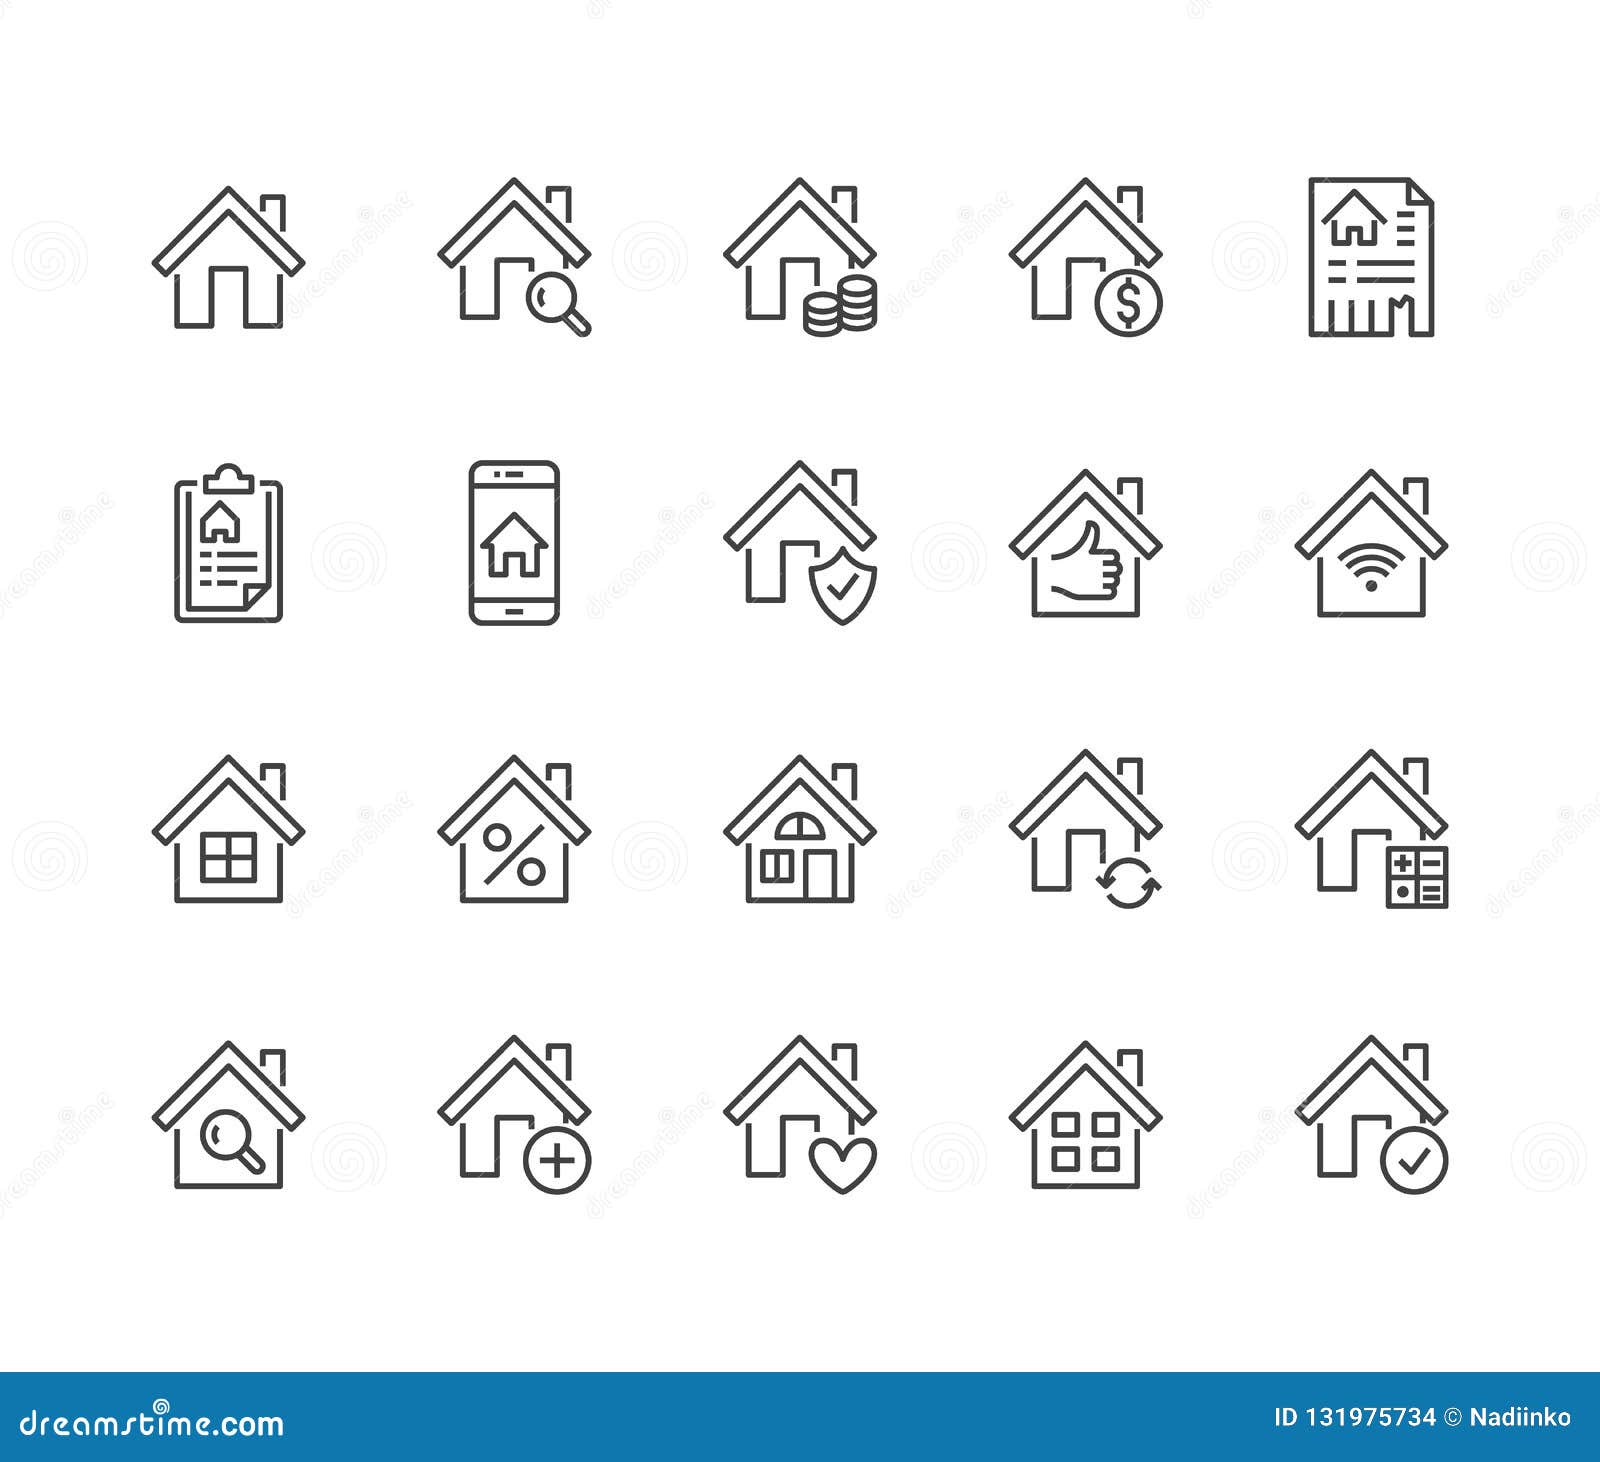 real estate flat line icons set. house sale, home insurance, mortgage calculator, apartment search app, building